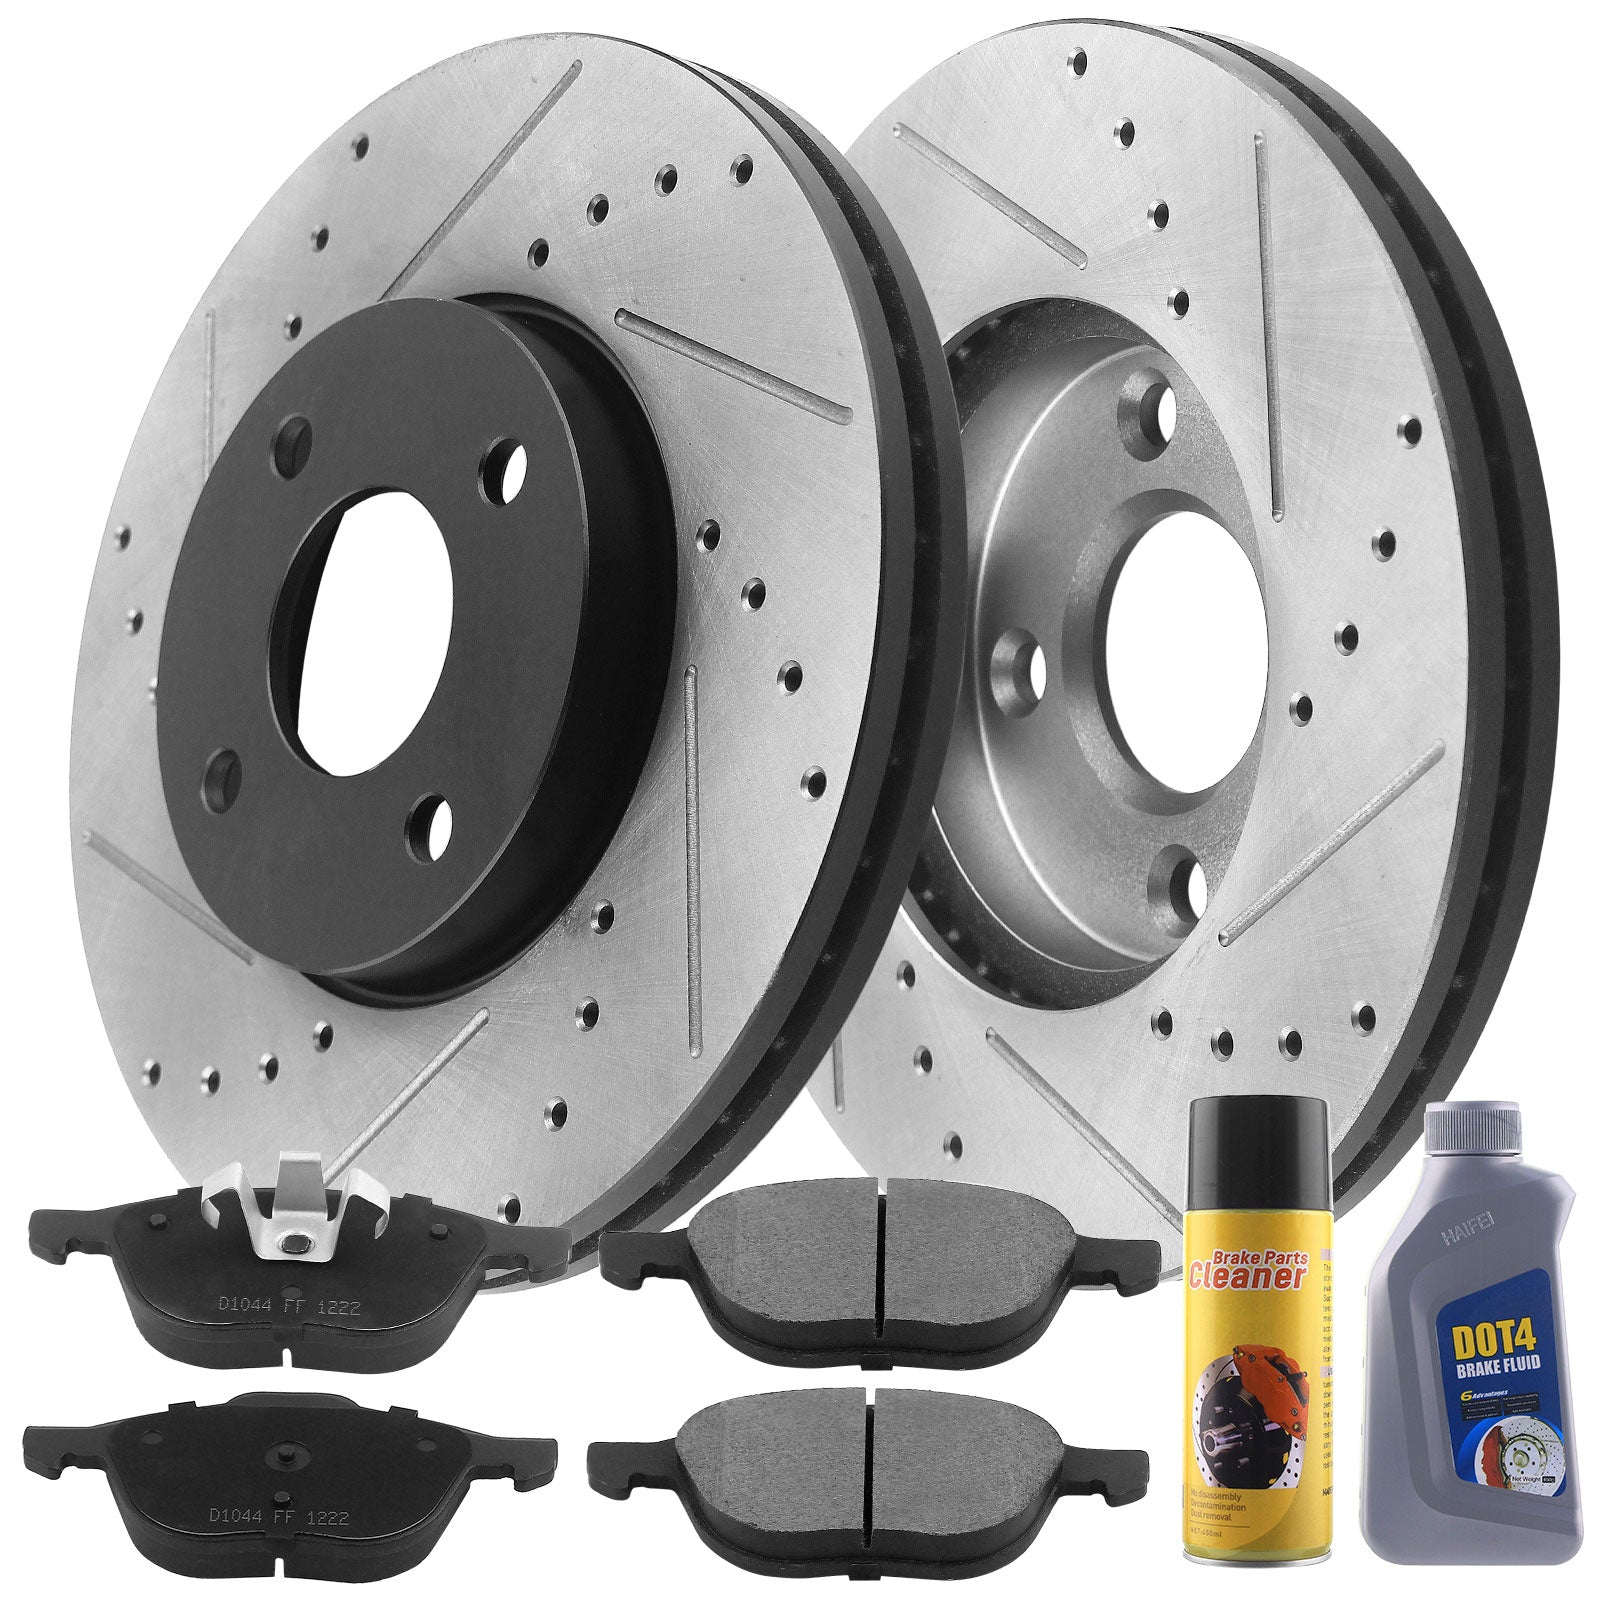 Front Drilled & Slotted Brake Rotors w/Ceramic Brake Pads w/Cleaner & Fluid Fit for 2005 2006 2007 Ford Focus(Not SVT Models) Front Brake Pads Brake Rotors, 4 Lugs(Bolts Not Included) MotorbyMotor